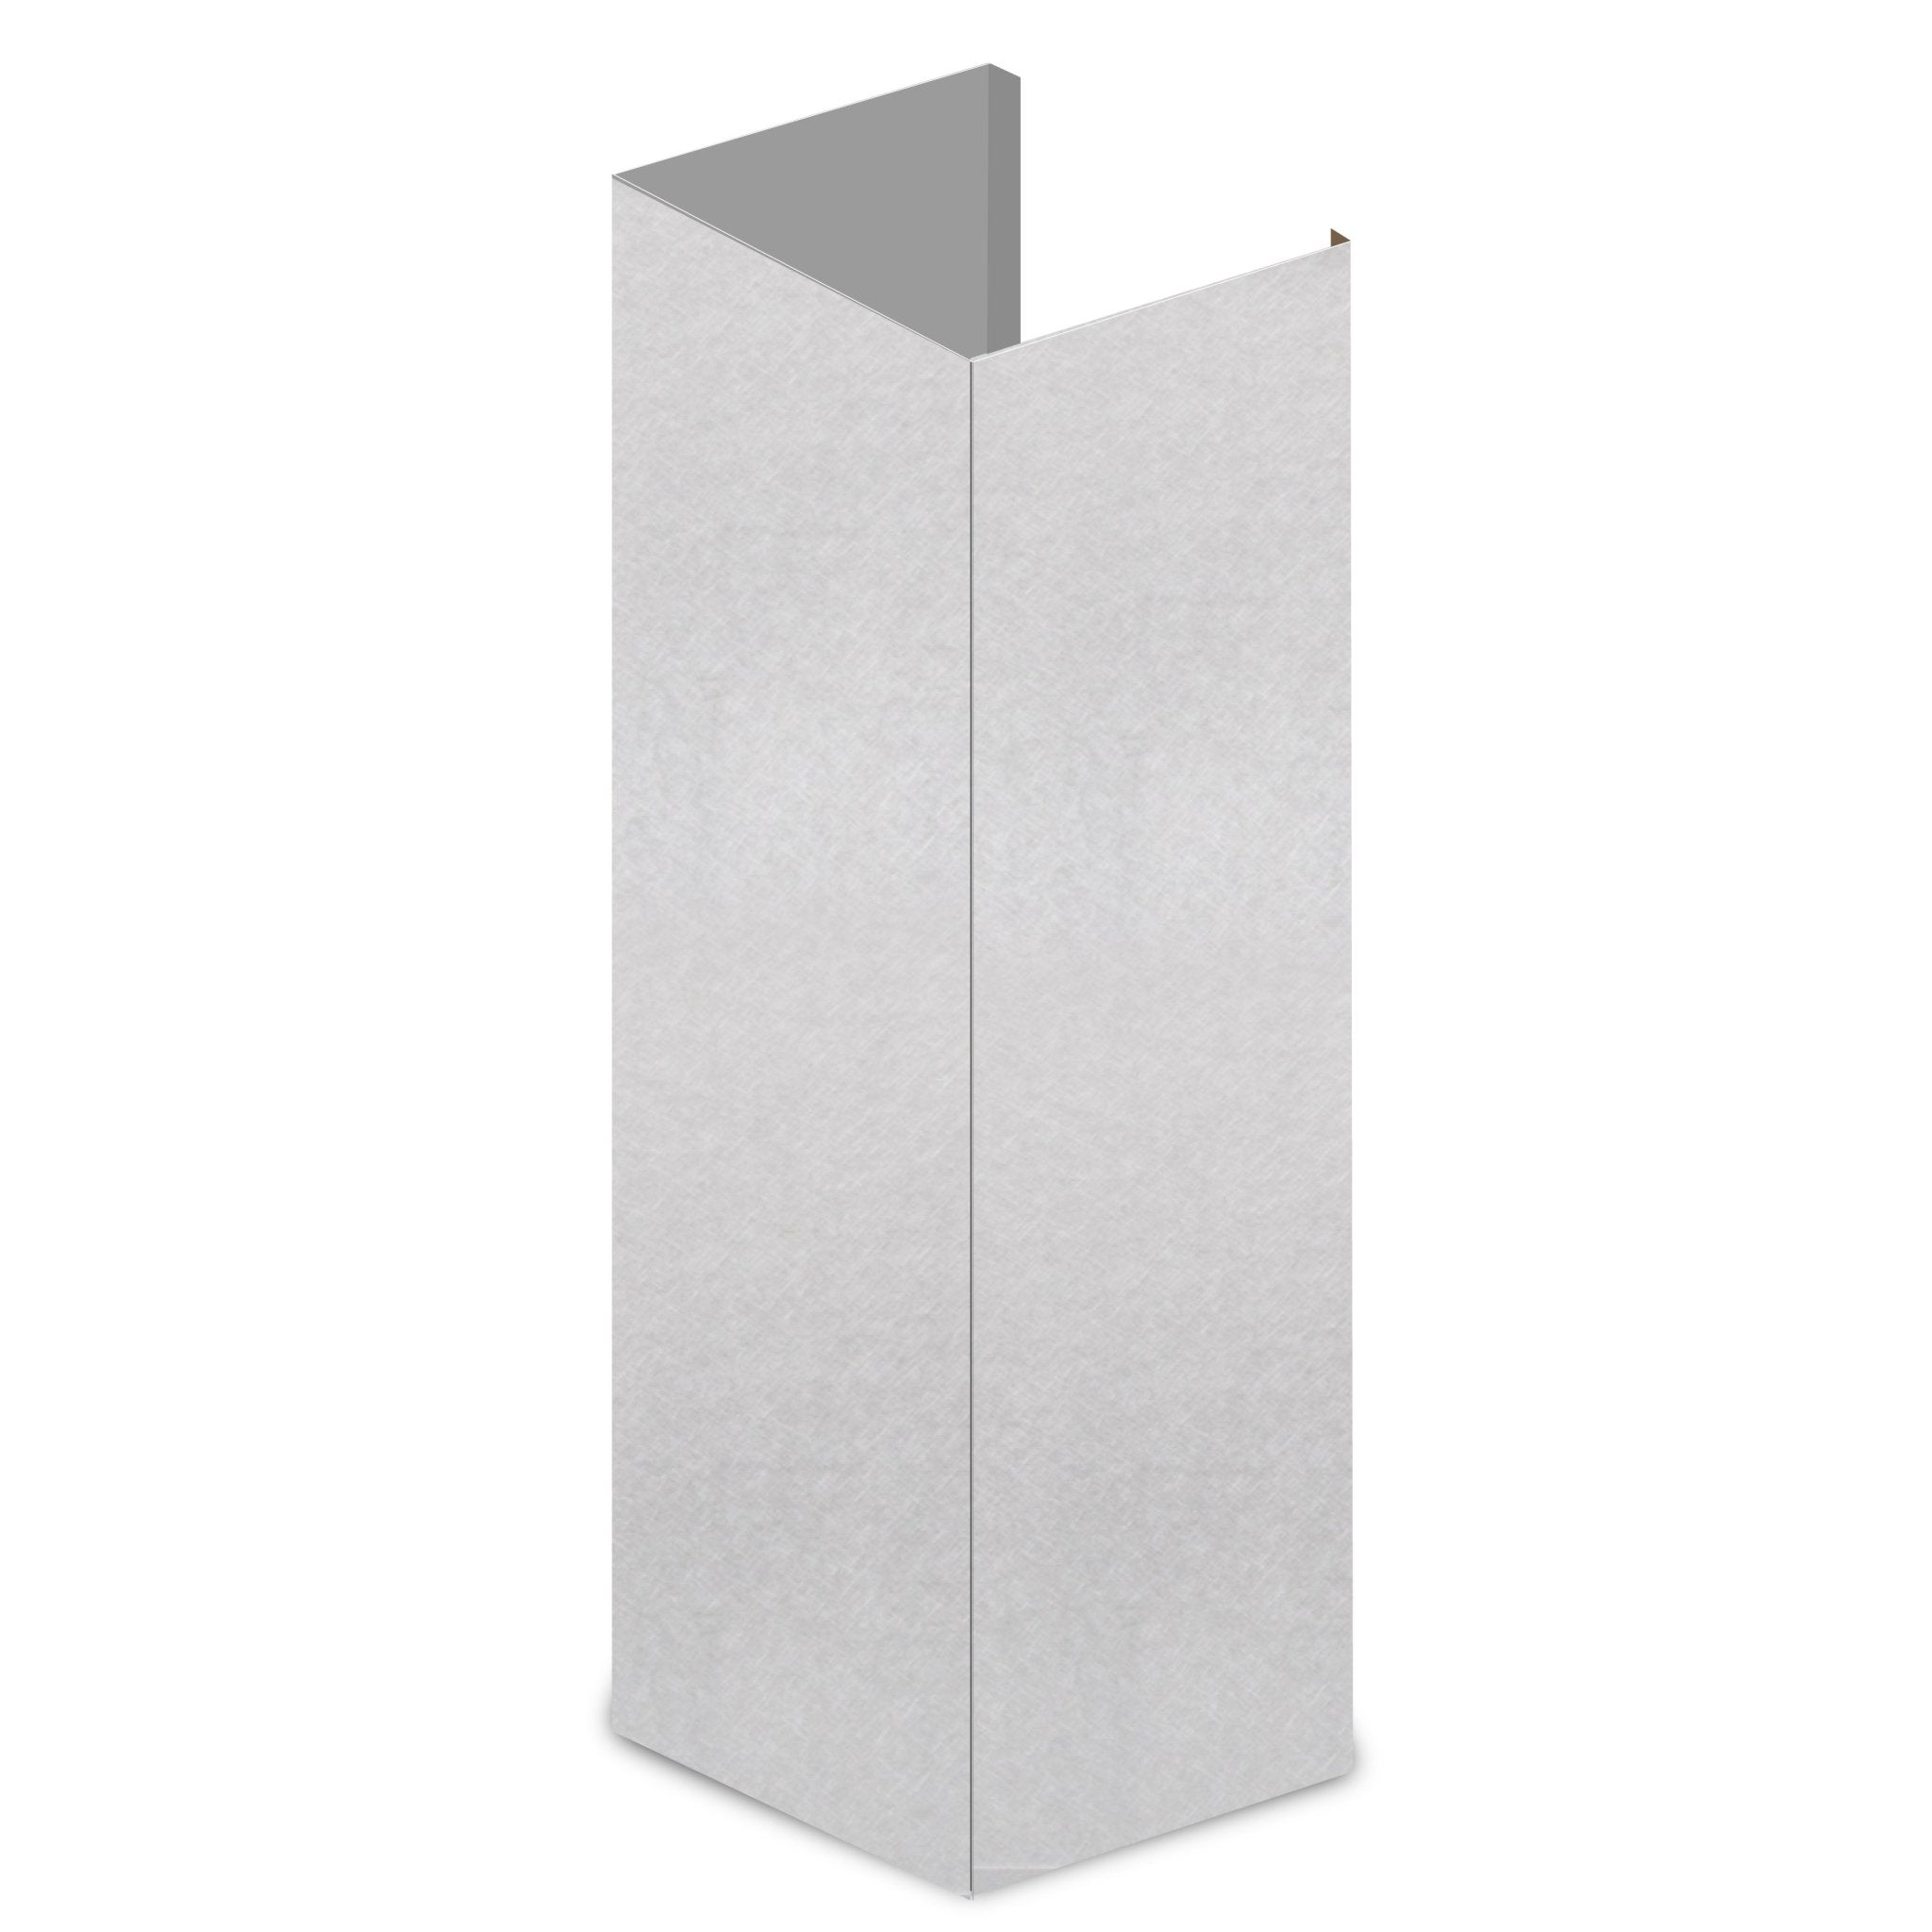 ZLINE 61" DuraSnow® Stainless Steel Chimney Extension for Ceilings up to 12.5 ft. (8KN4S-E)